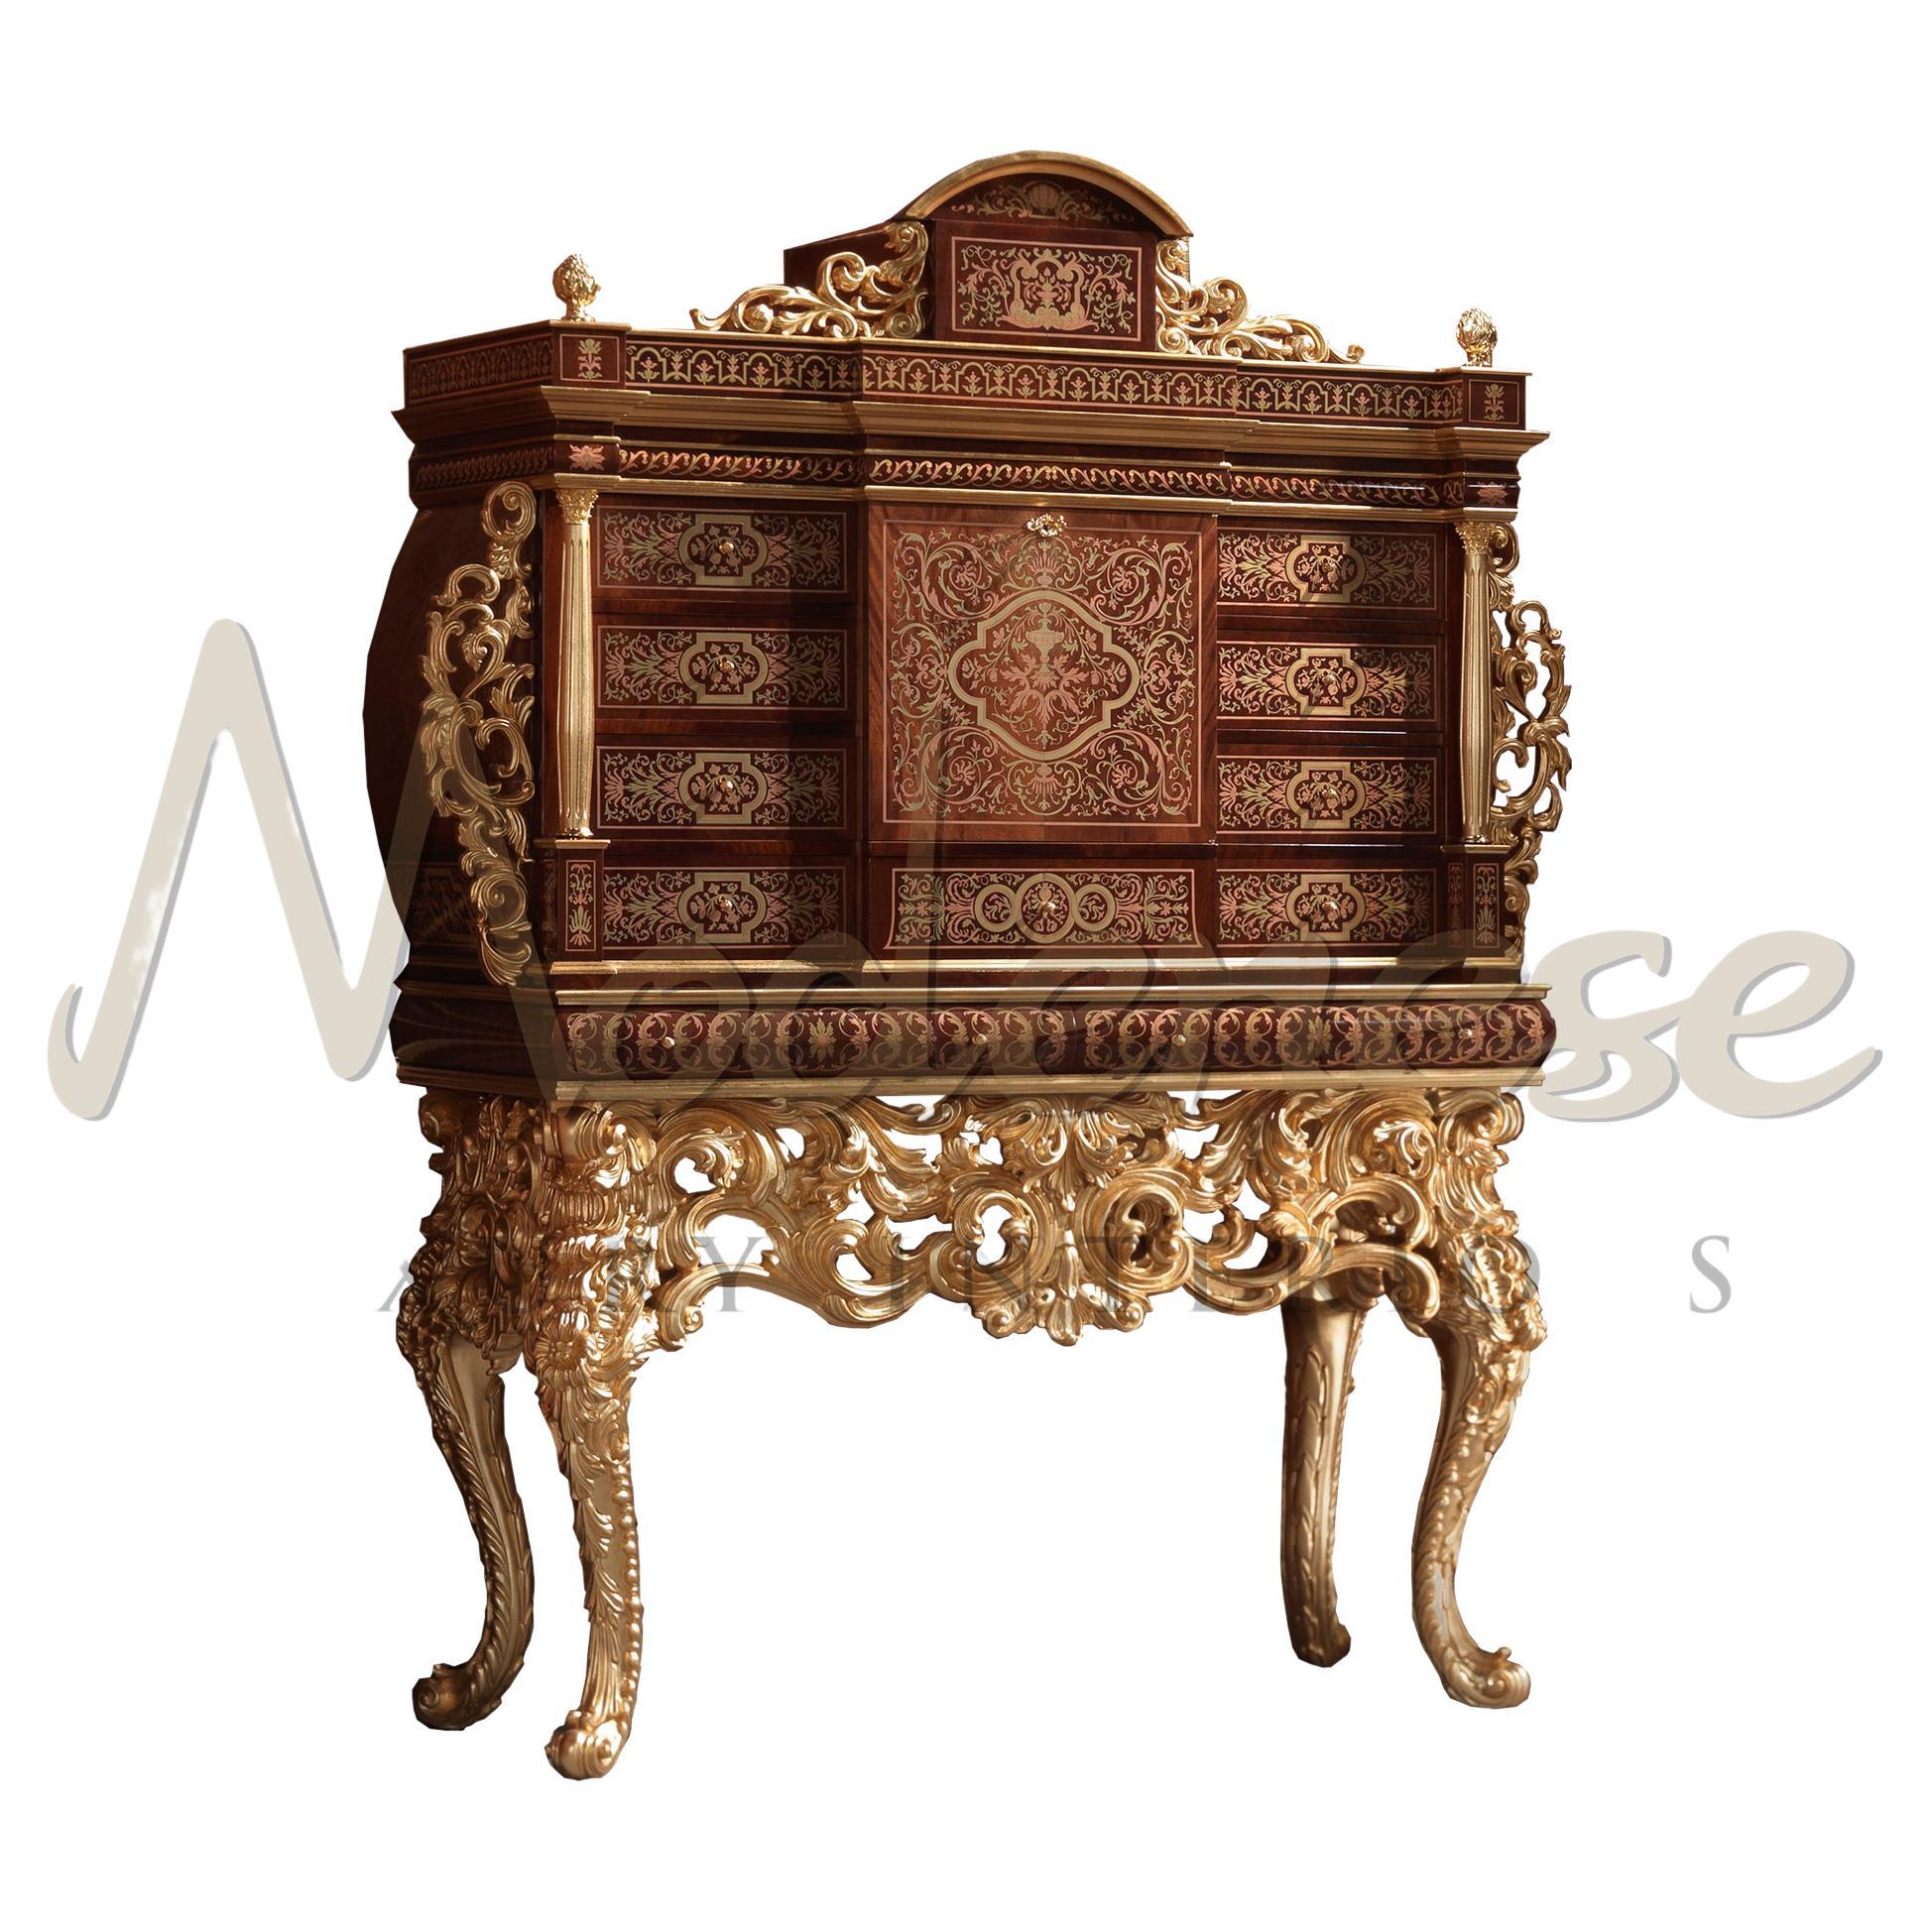 Hand-Painted 21st Century Wooden Cigar Cabinet with Baroque Carvings, Handpainted, Gold Leaf For Sale